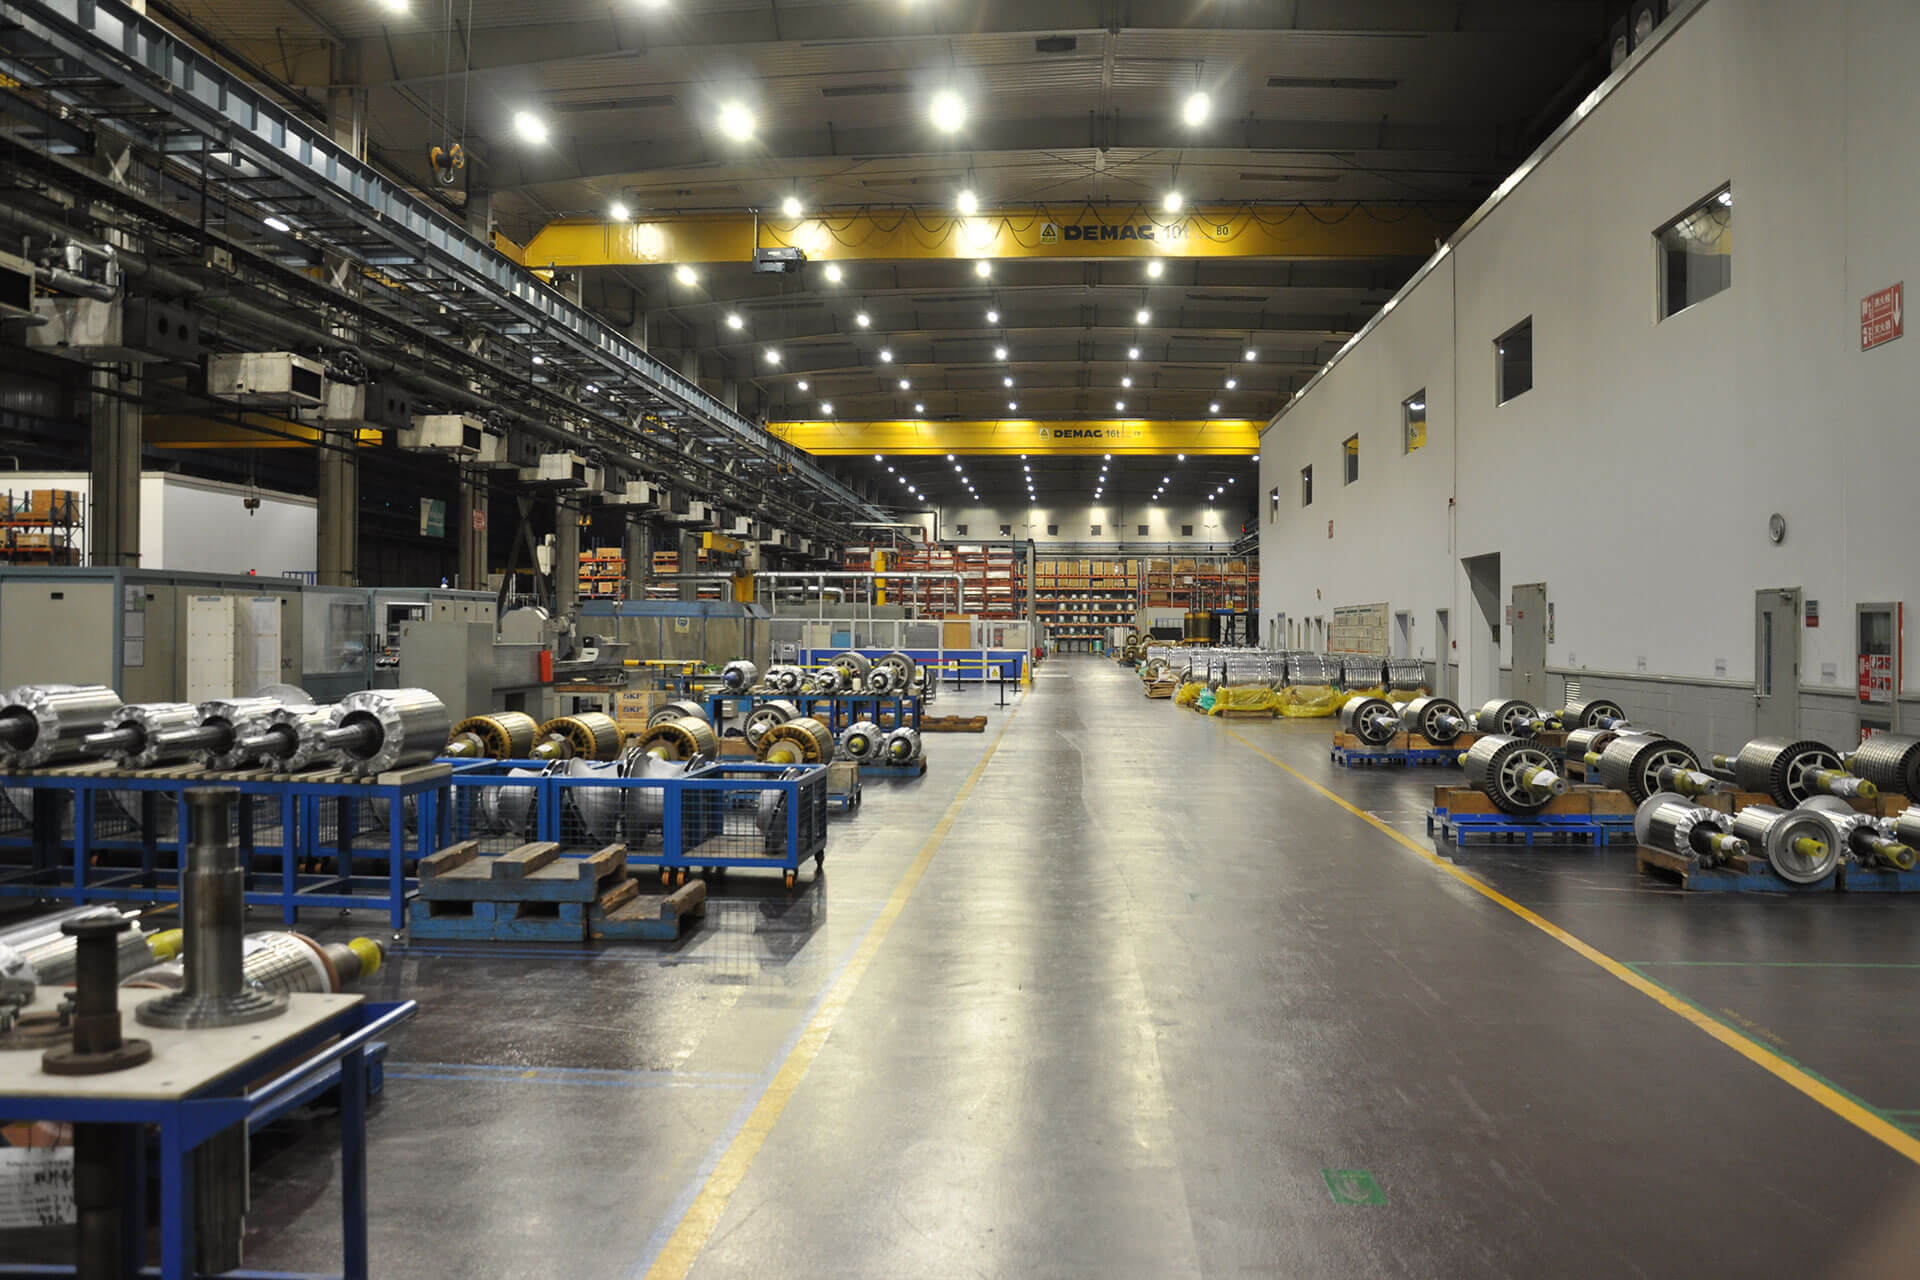 Schréder provided an energy-efficient lighting solution that improved visibility for this busy production facility